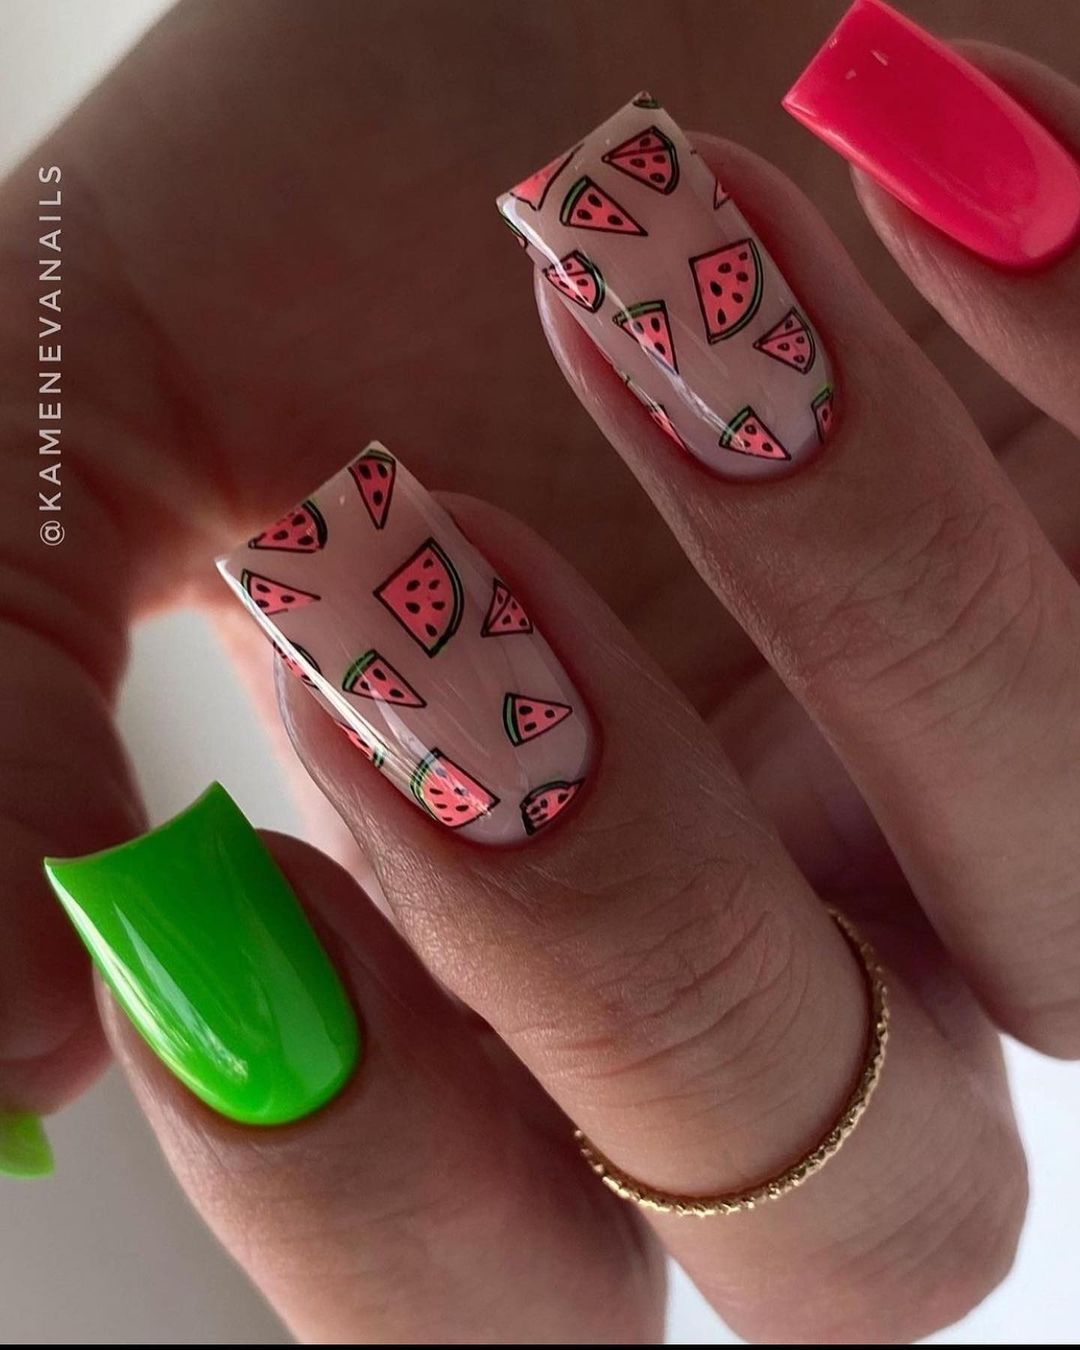 50 Best Nail Designs Trends To Try Out In 2022 images 33